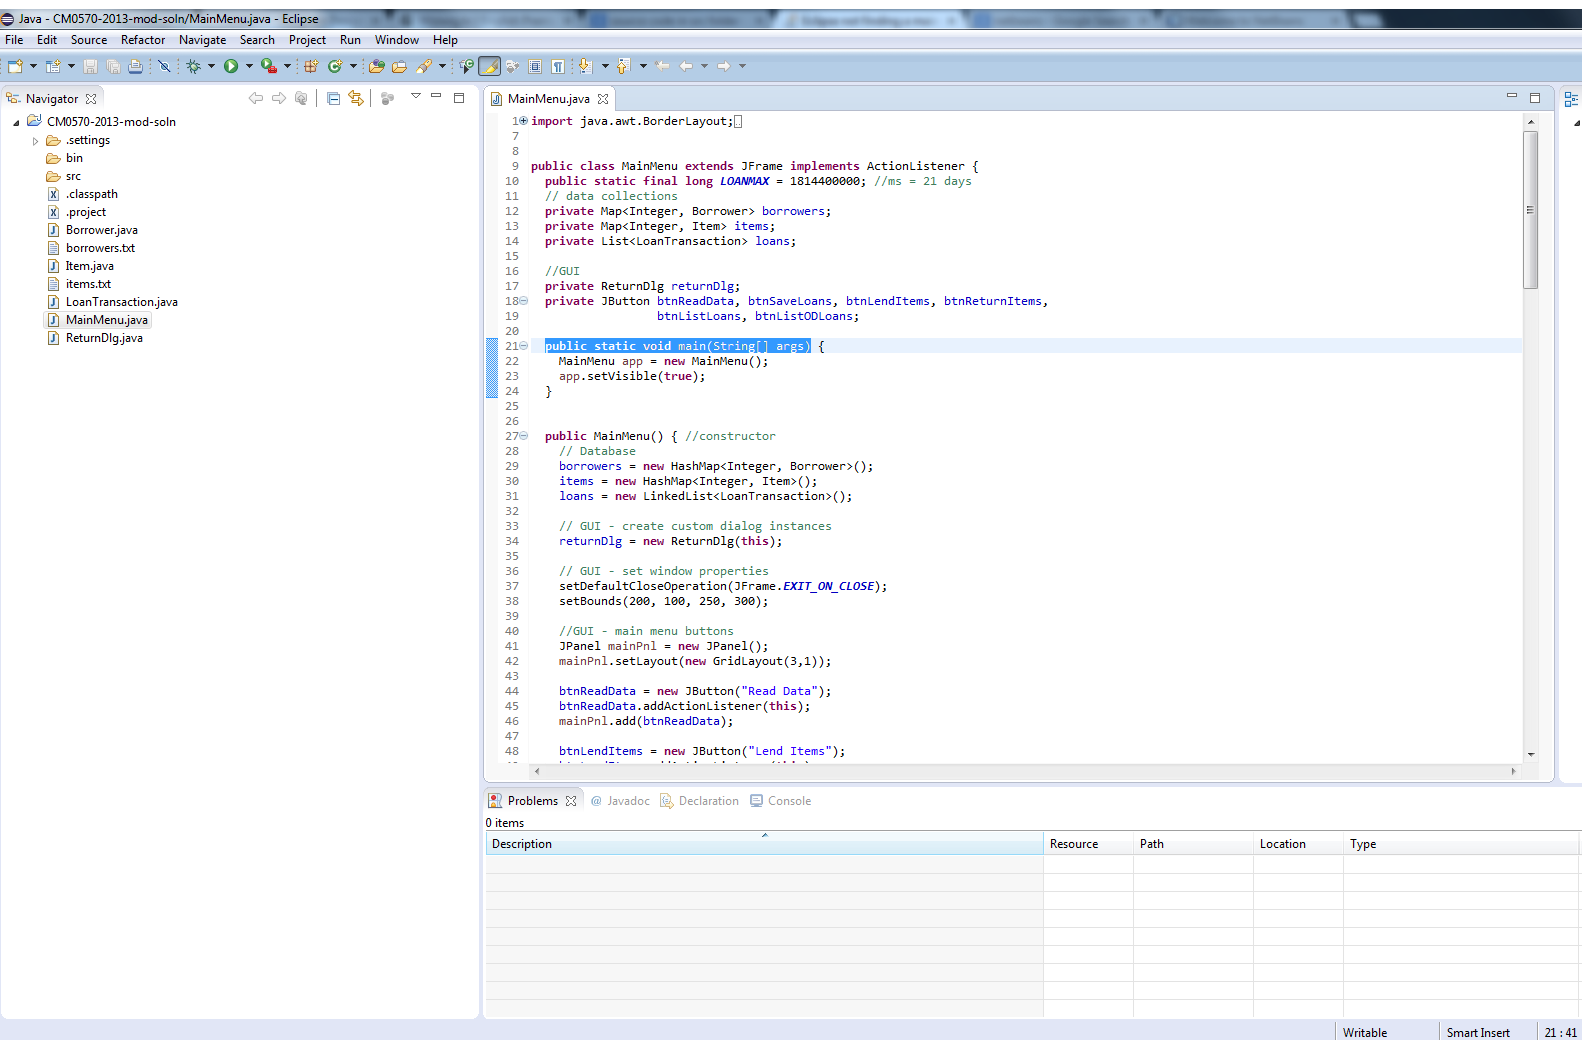 Here is a screenshot of eclipse with the main method